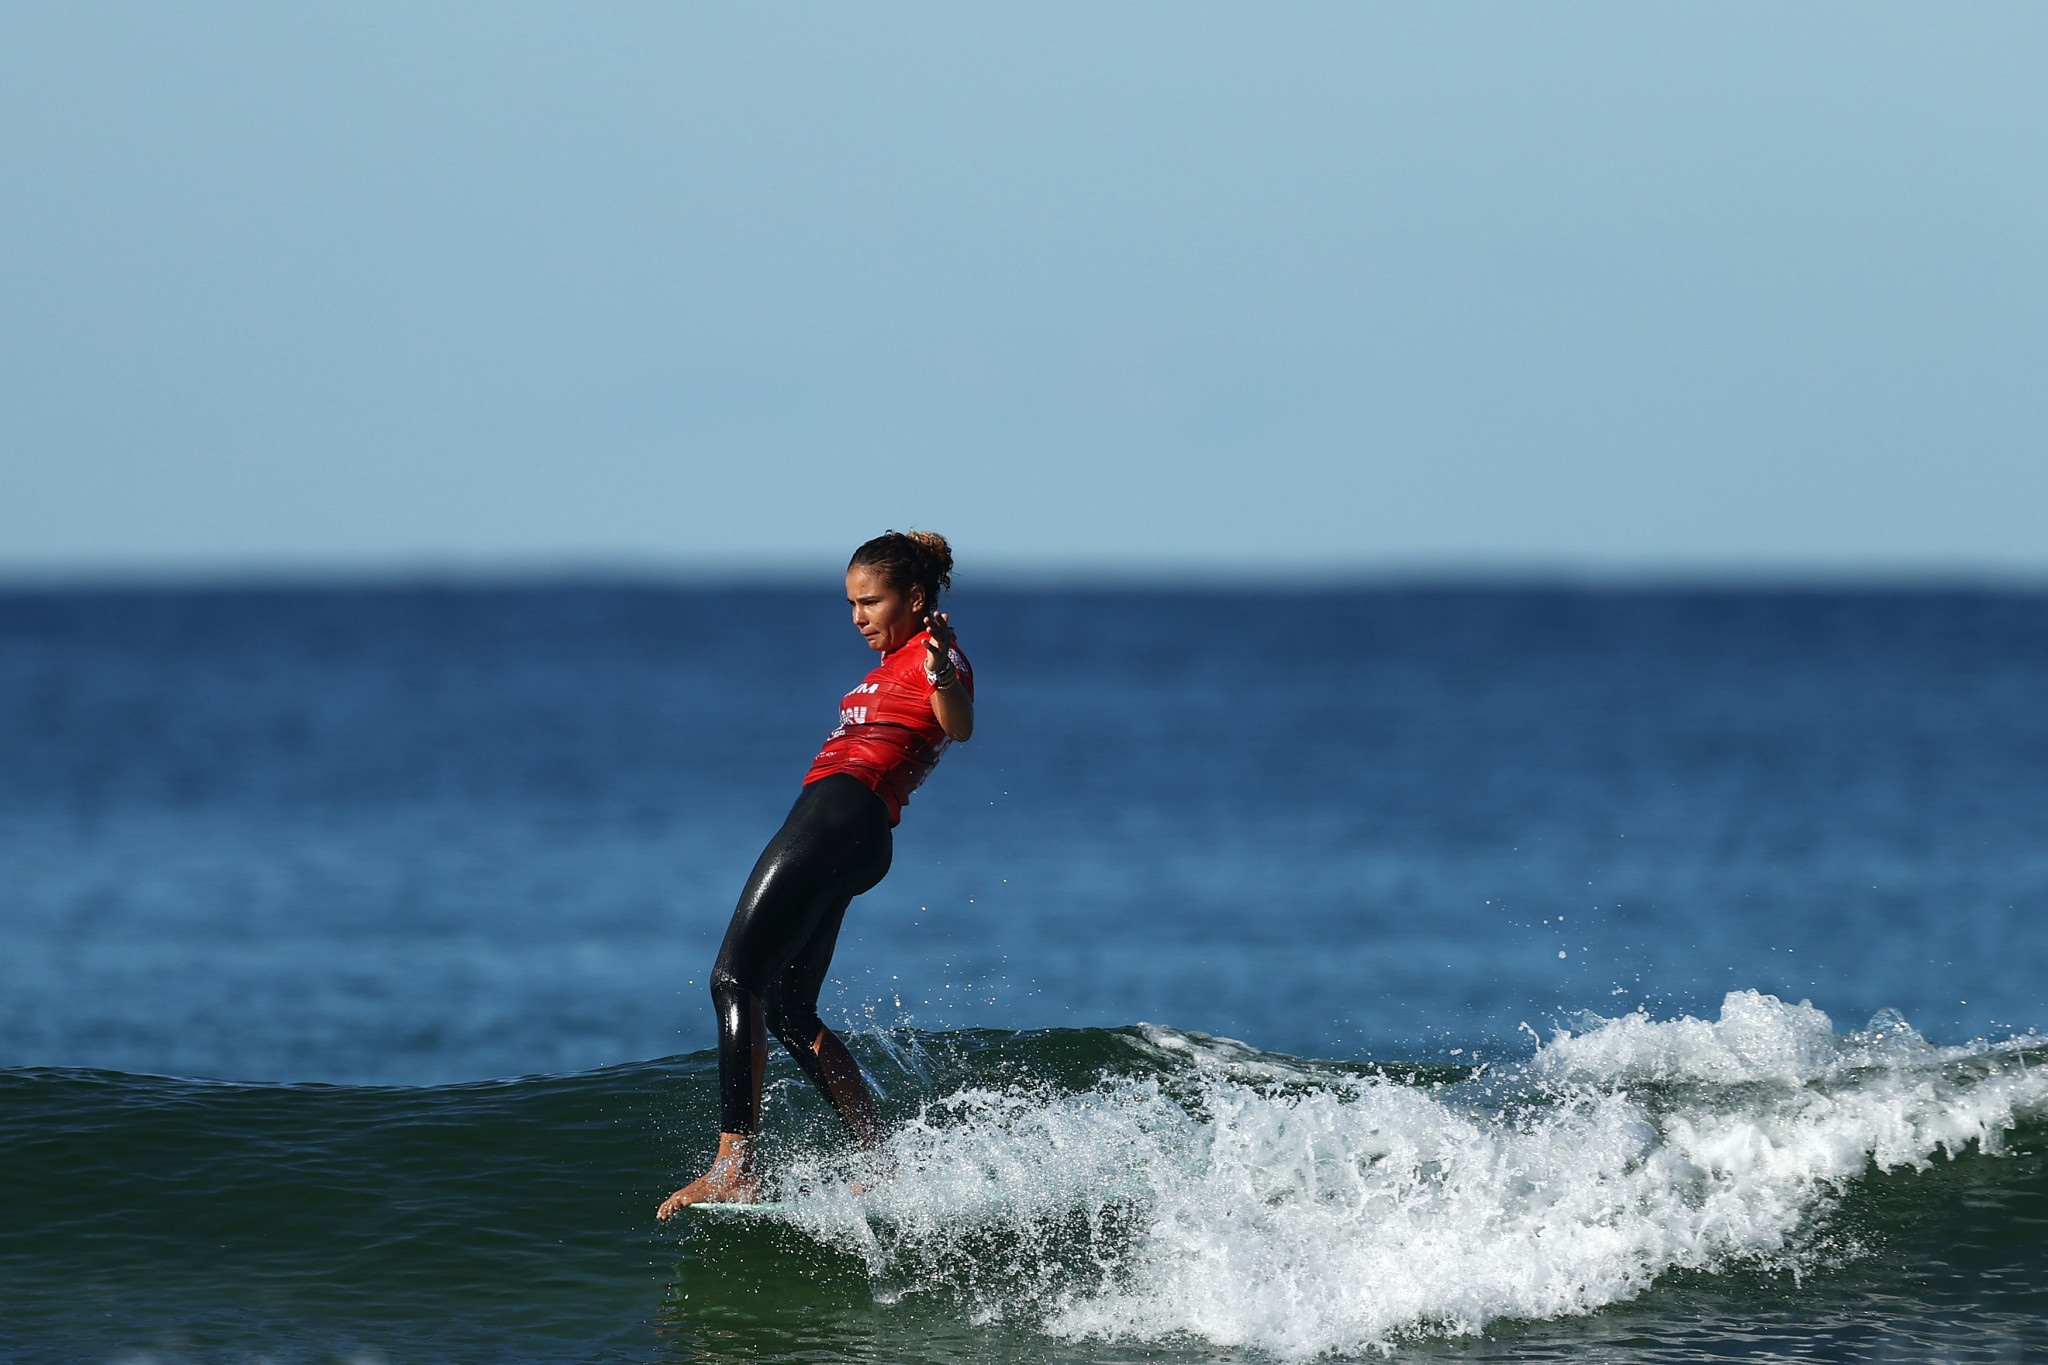 France claim sweep of gold medals at ISA World Longboard Championships